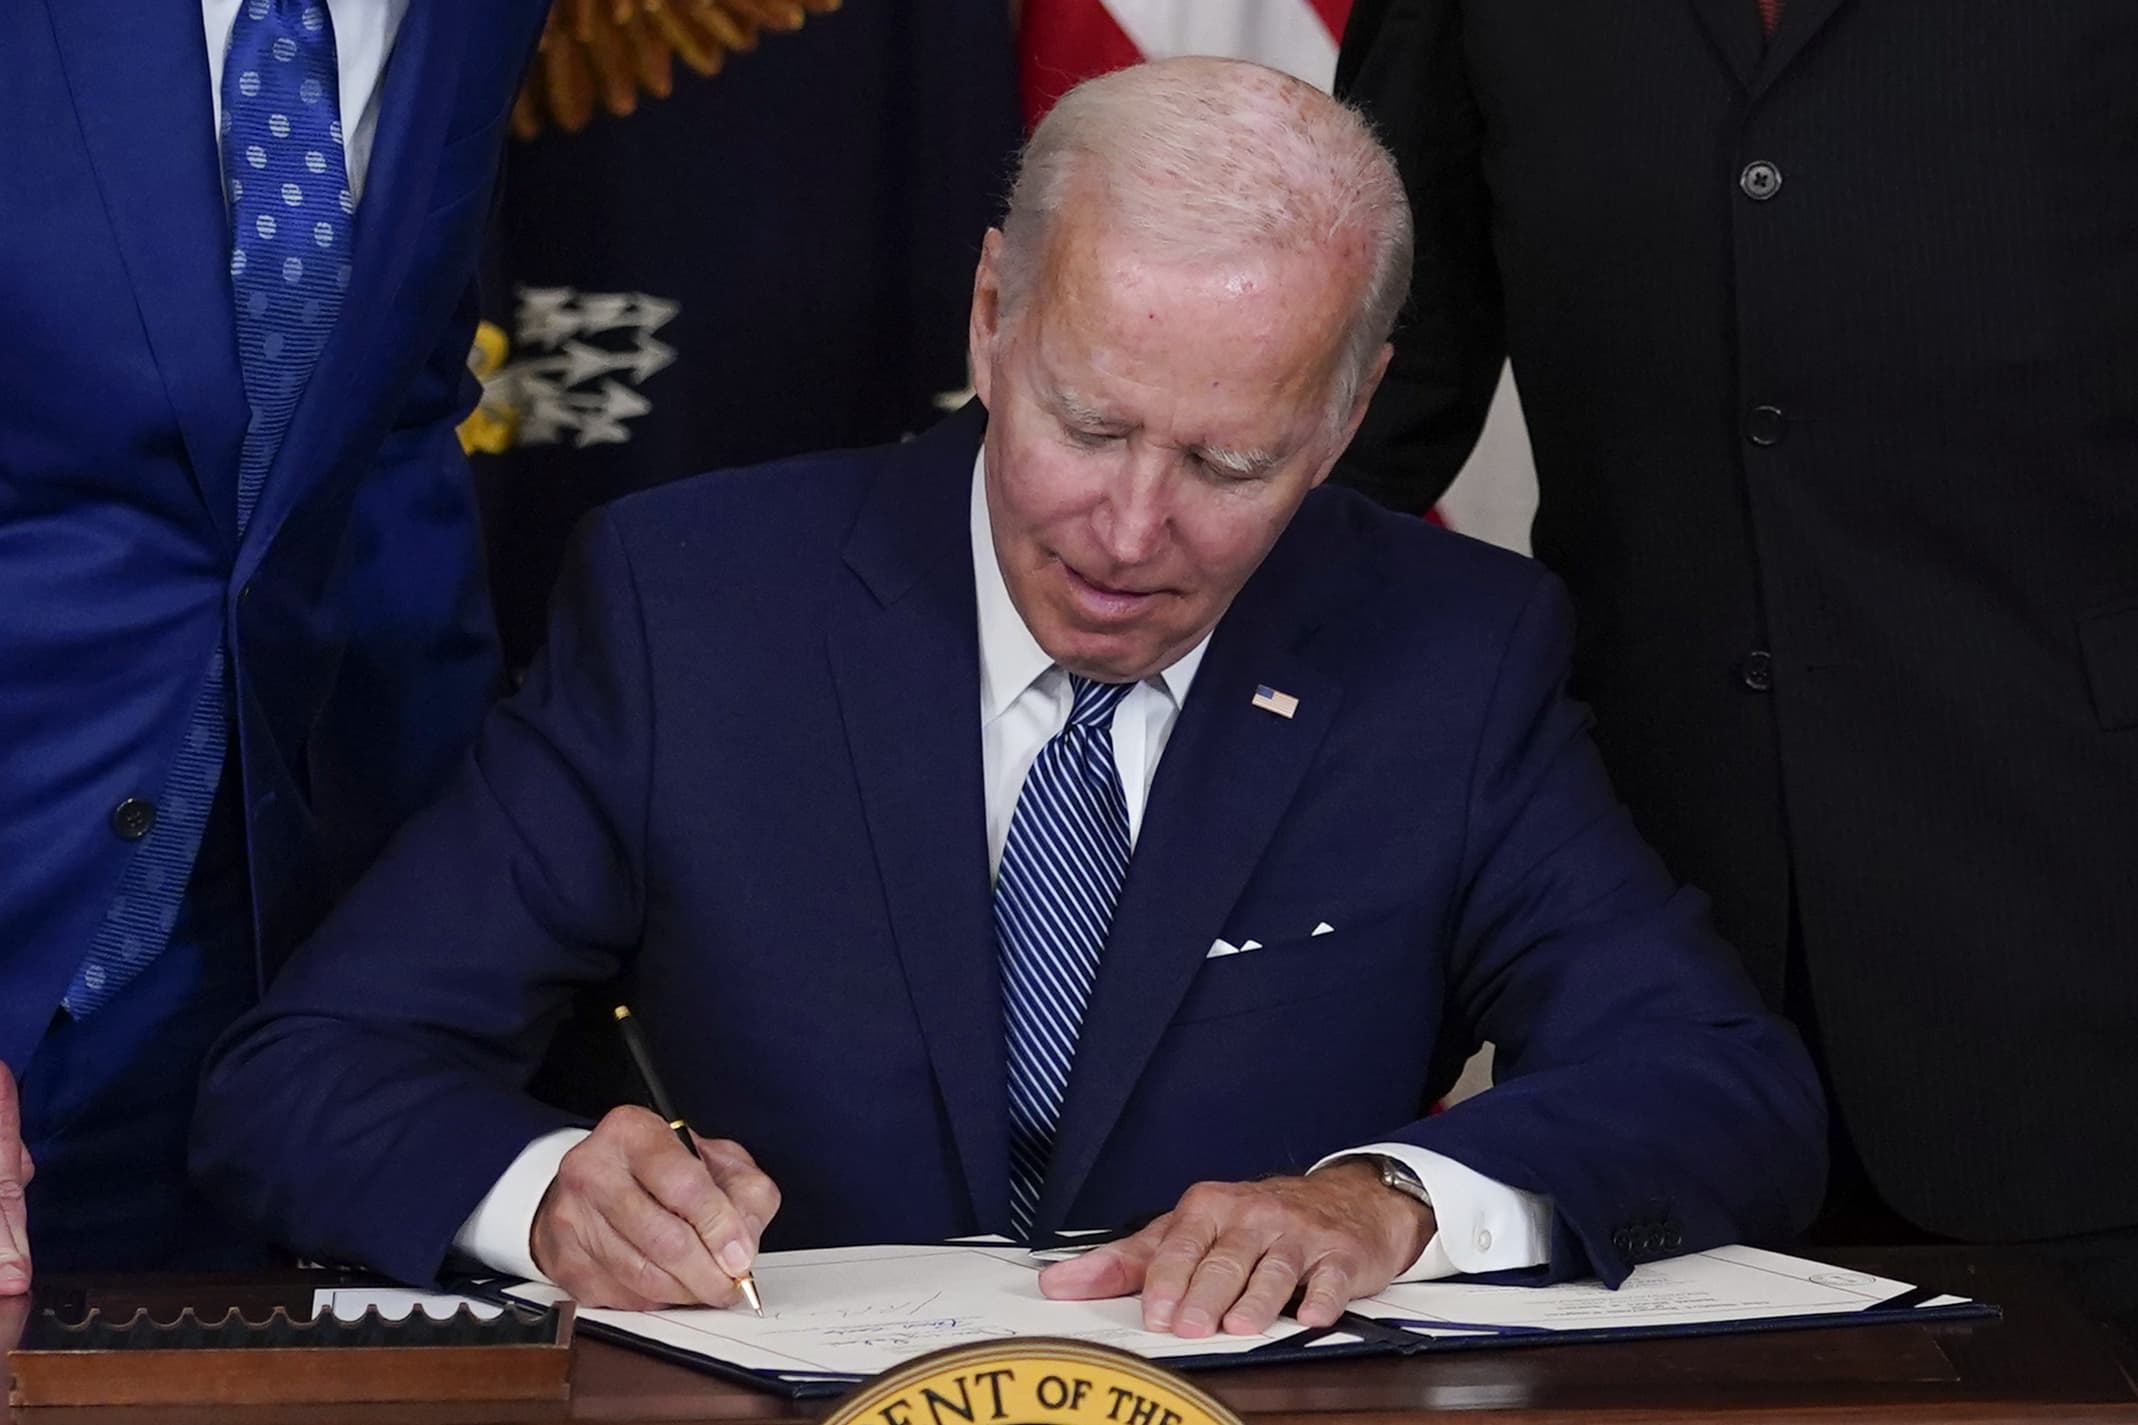 President Joe Biden signs the Democrats' landmark climate change and health care bill in the State Dining Room of the White House in Washington, Tuesday, Aug. 16, 2022. (Susan Walsh/AP)